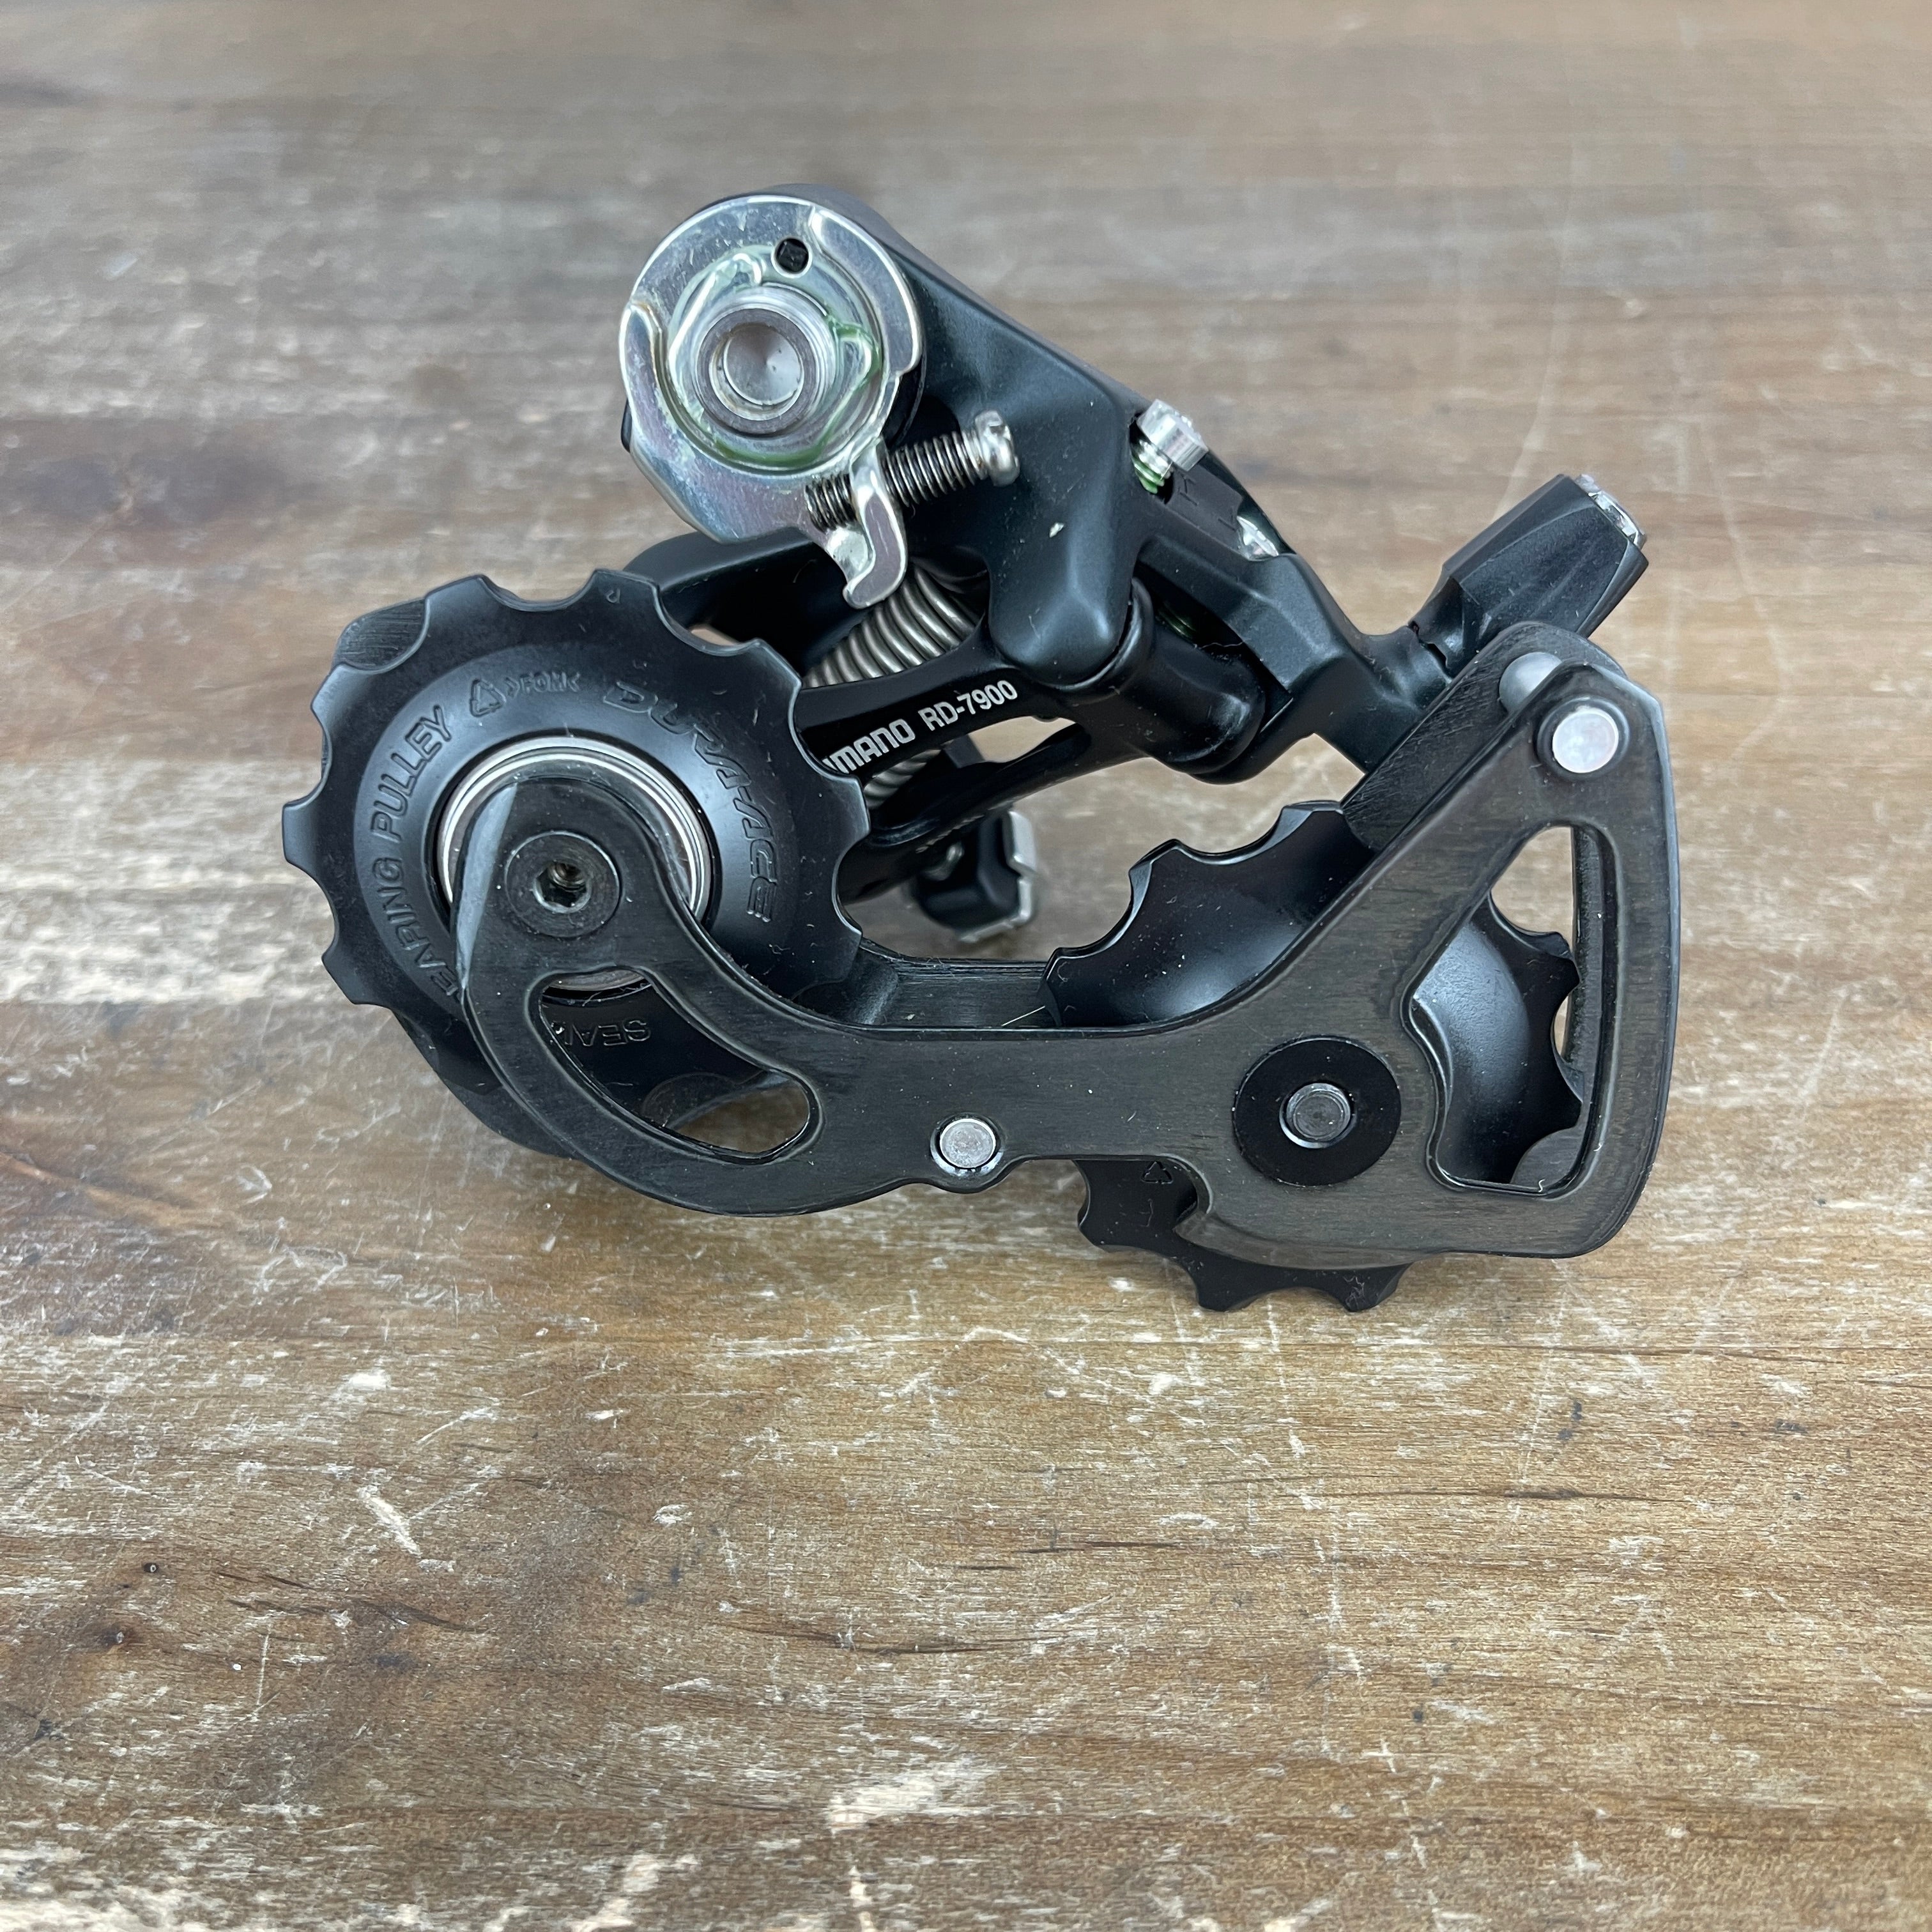 New Takeoff! Shimano Dura Ace RD-7900 10-Speed Mechanical Rear